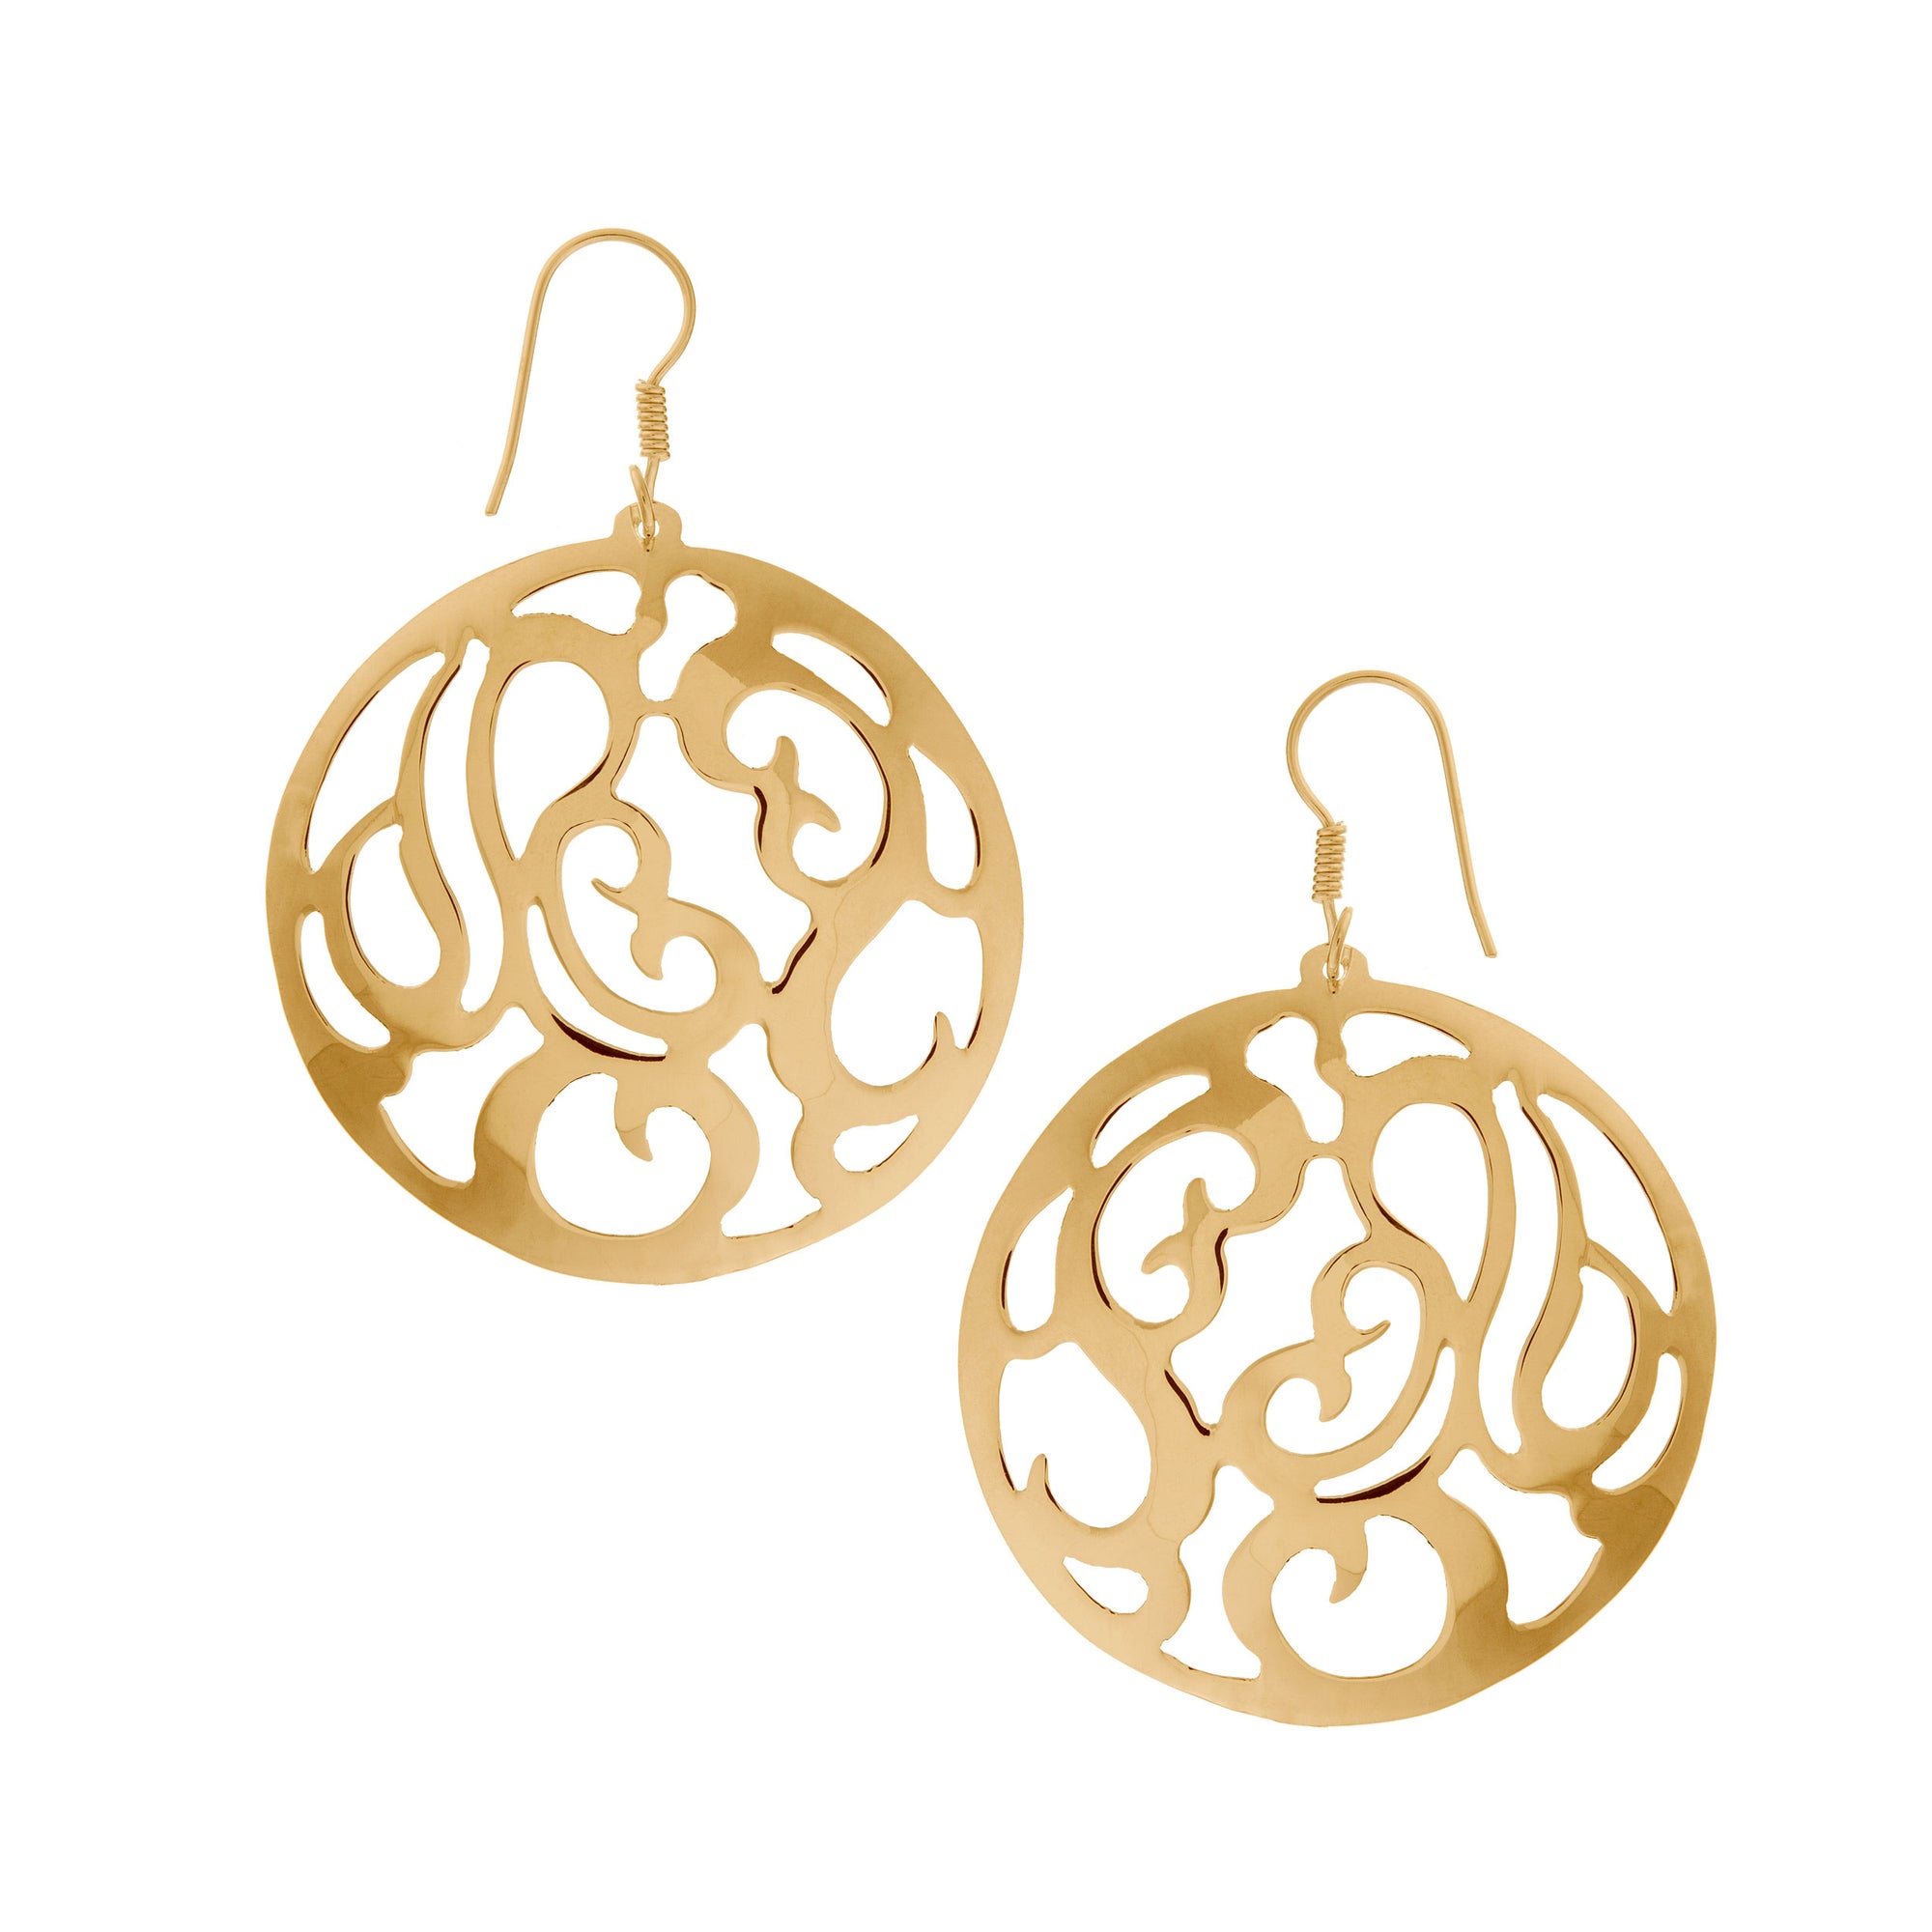 Alchemia Patterned Round Earrings | Charles Albert Jewelry